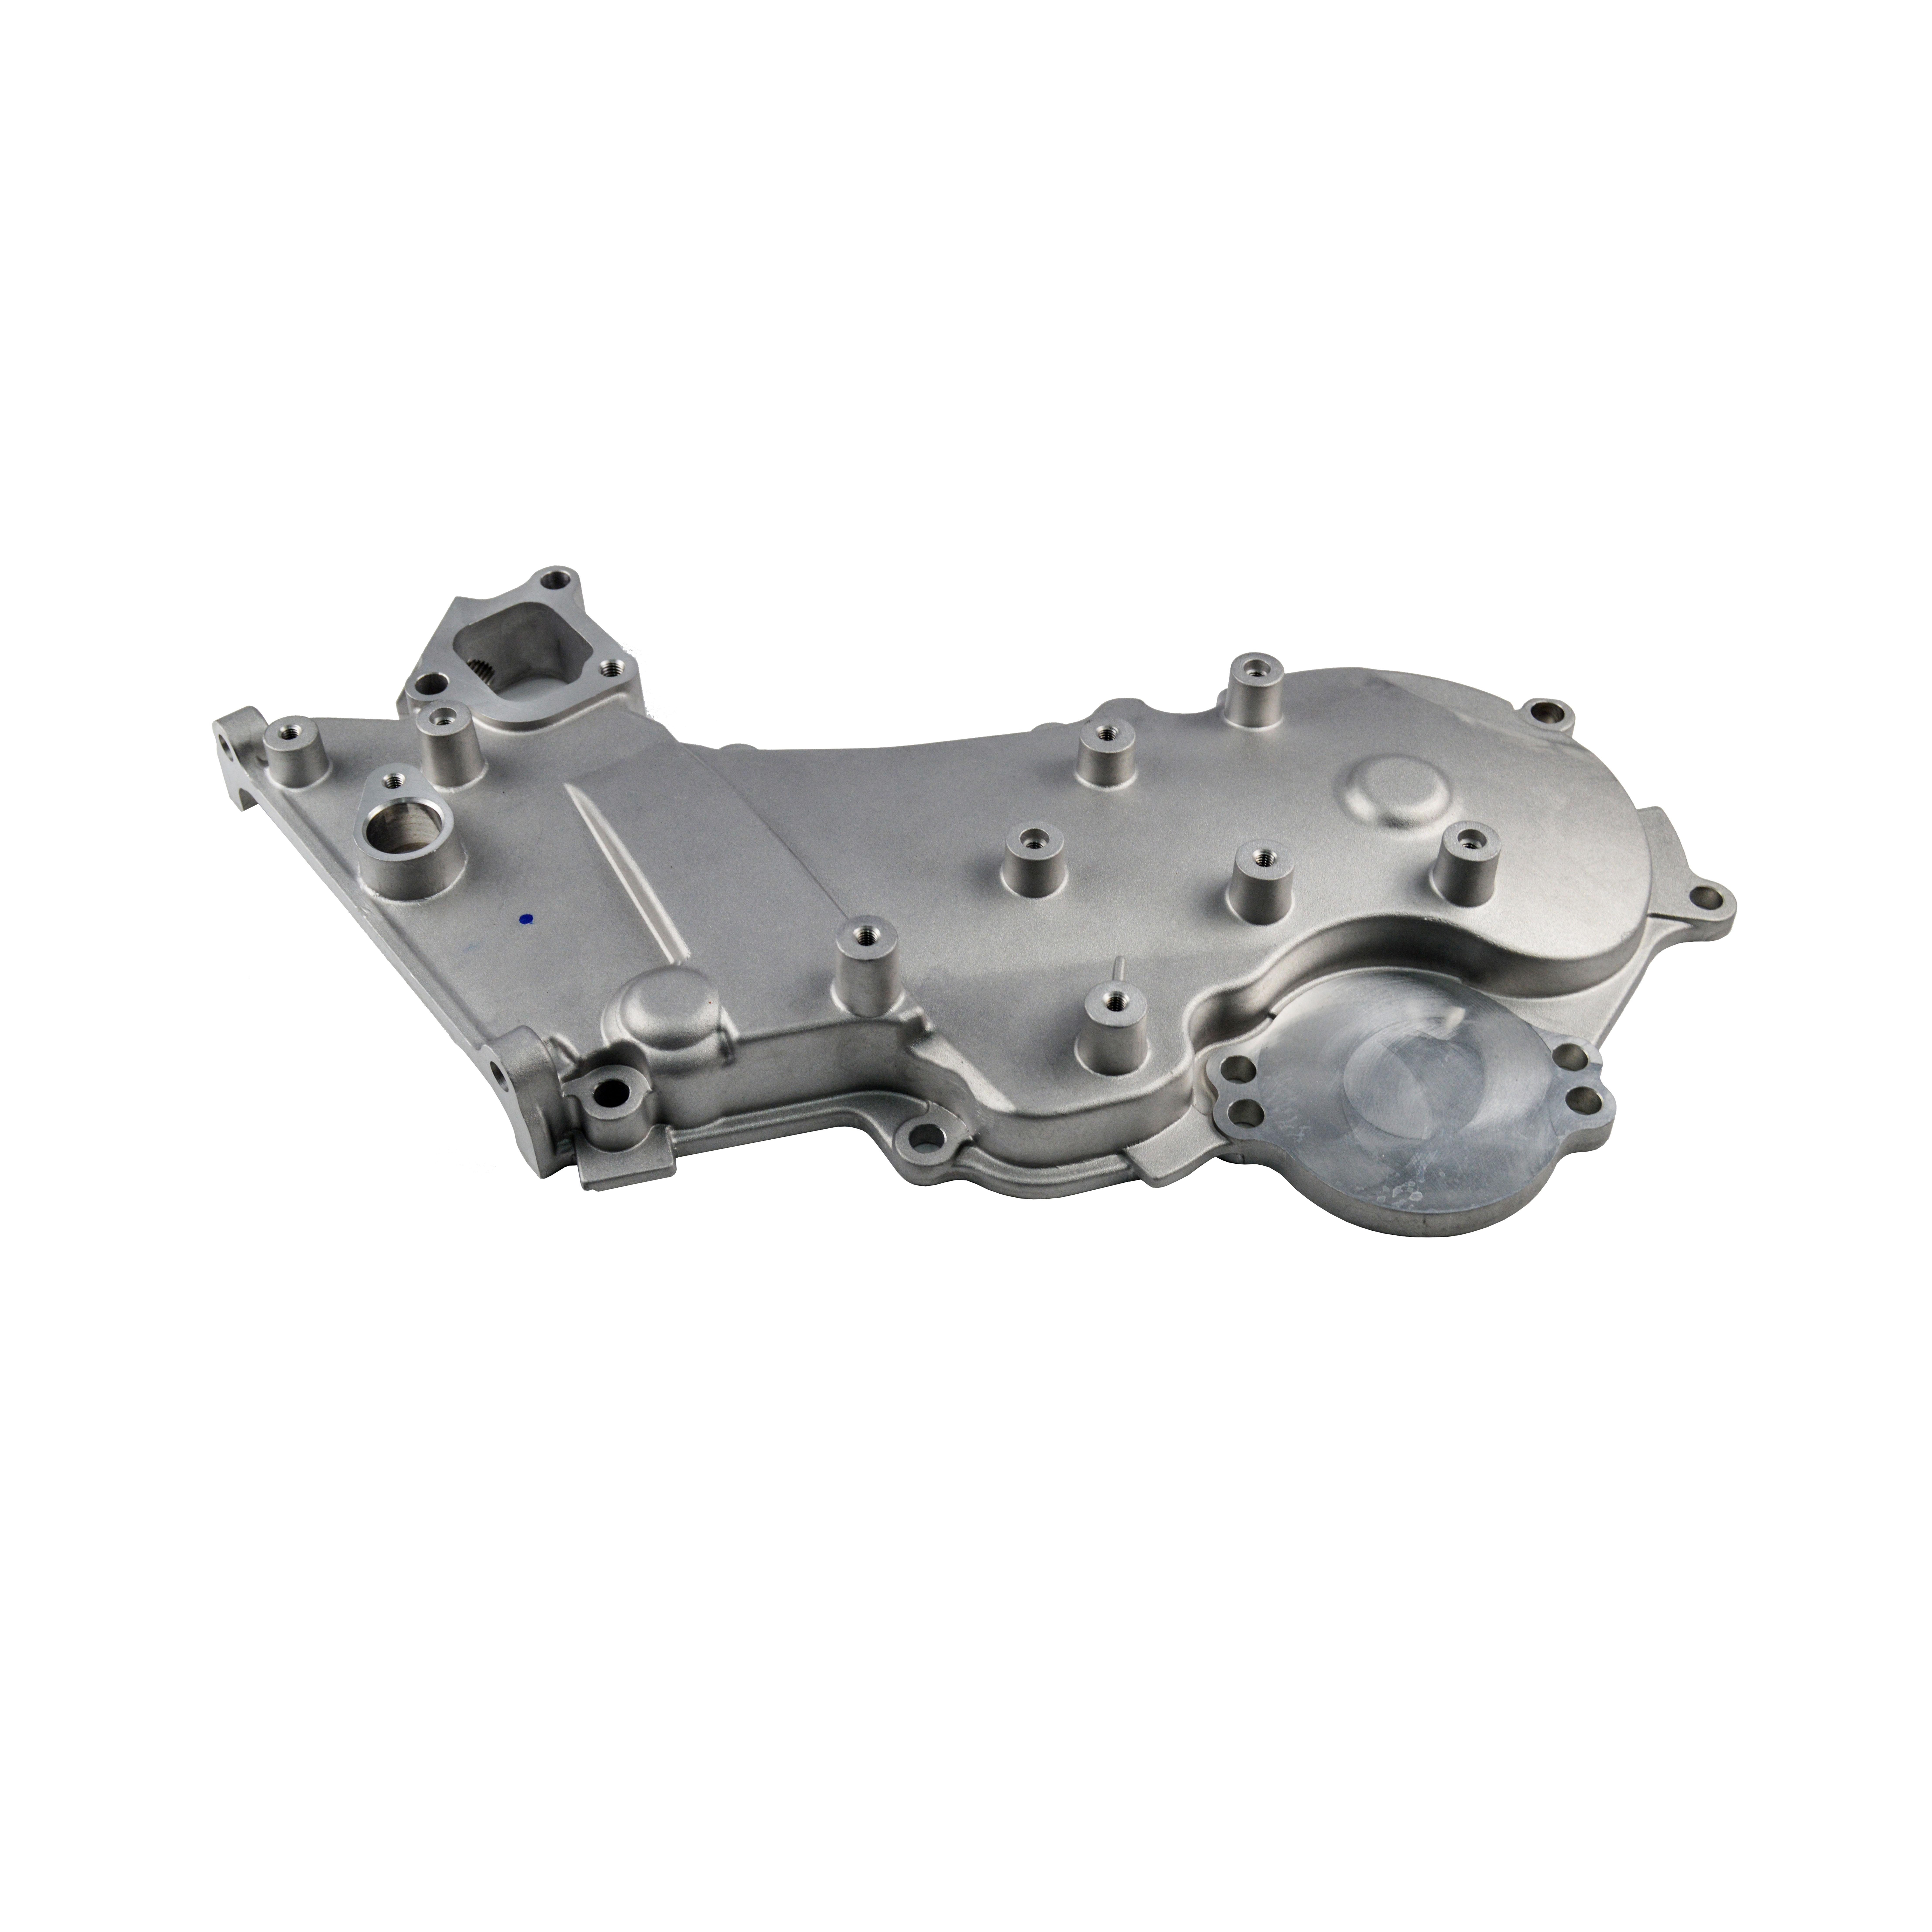 OEM Quality 13036 A080A Dongfeng Yufeng Rich Cabstar ZD30 Auto Engine Parts Timing Chain Cover 